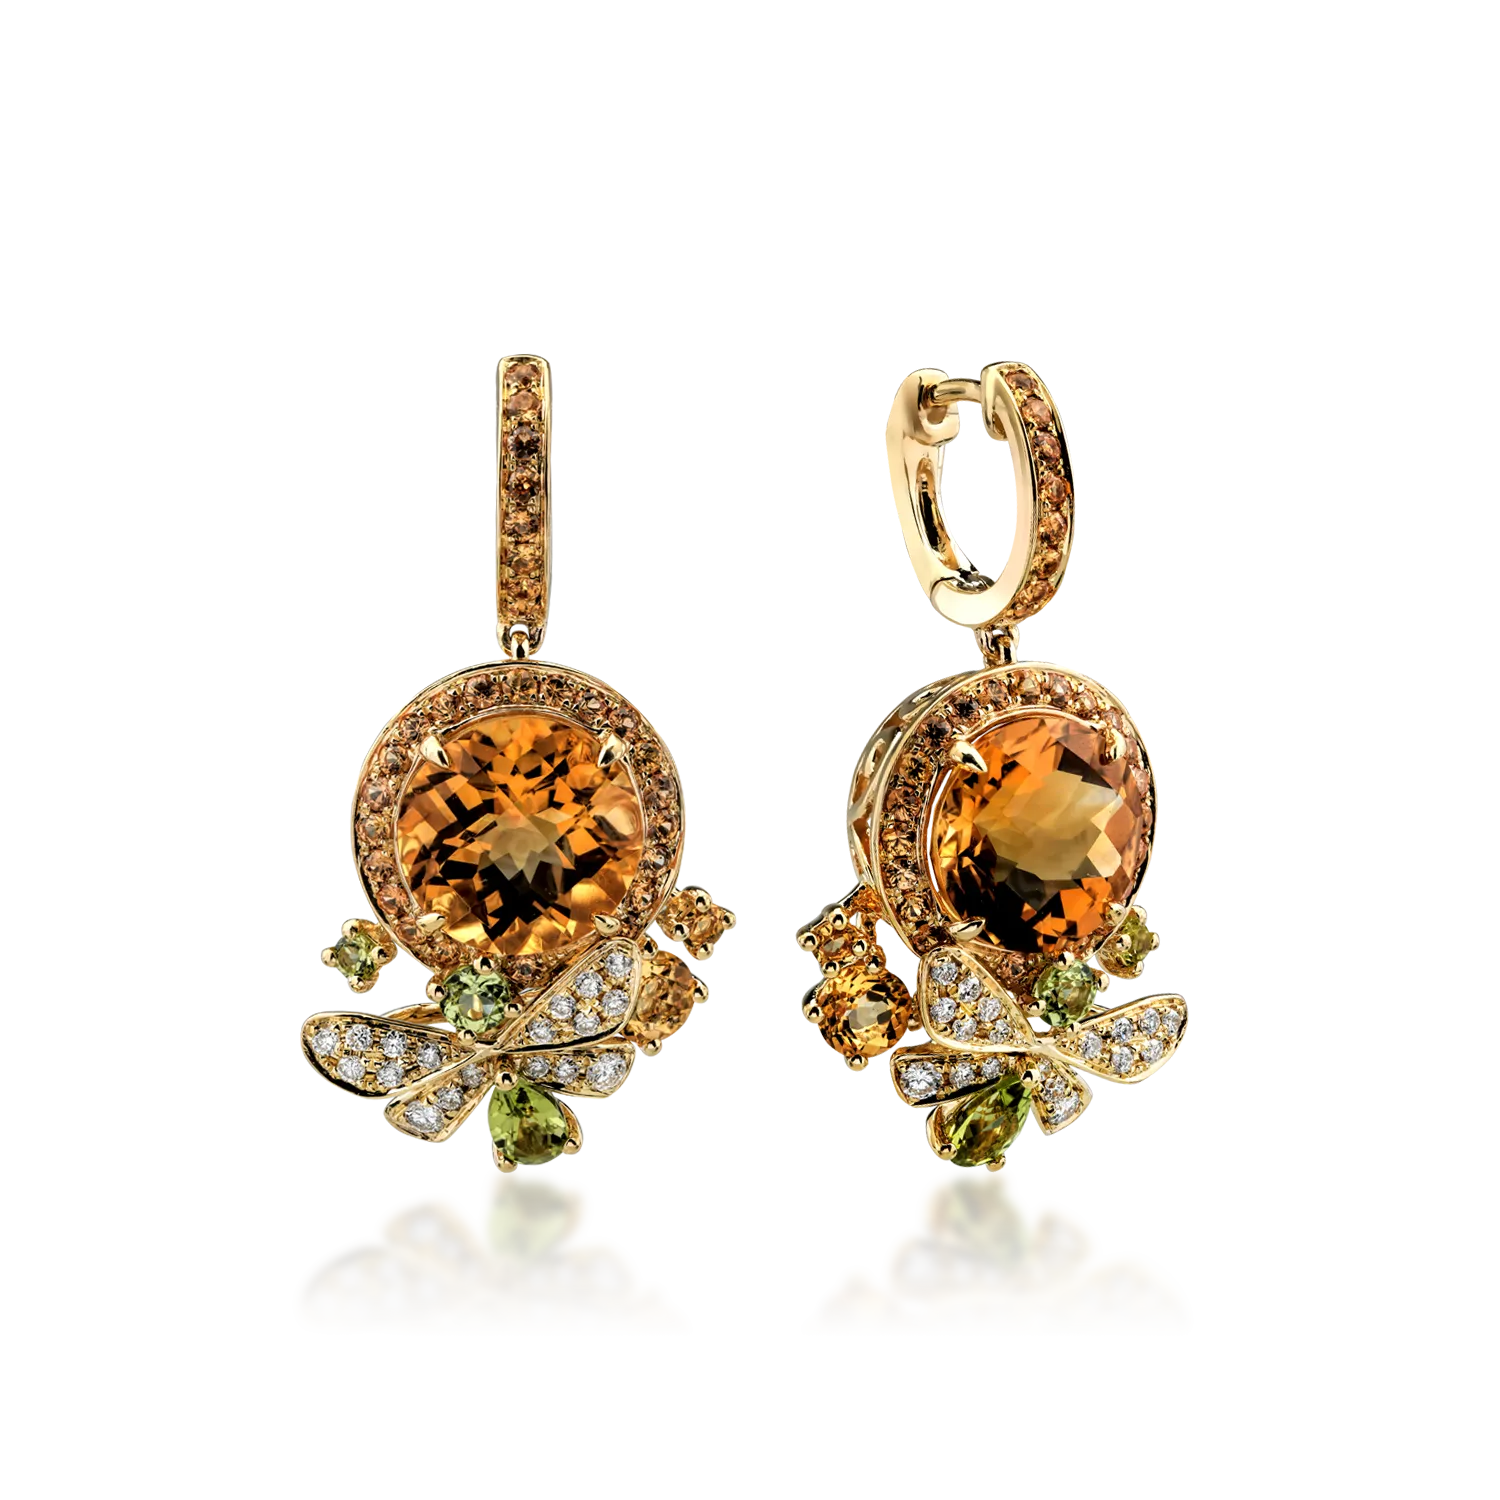 18K yellow gold earrings with 10.39ct precious and semiprecious stones